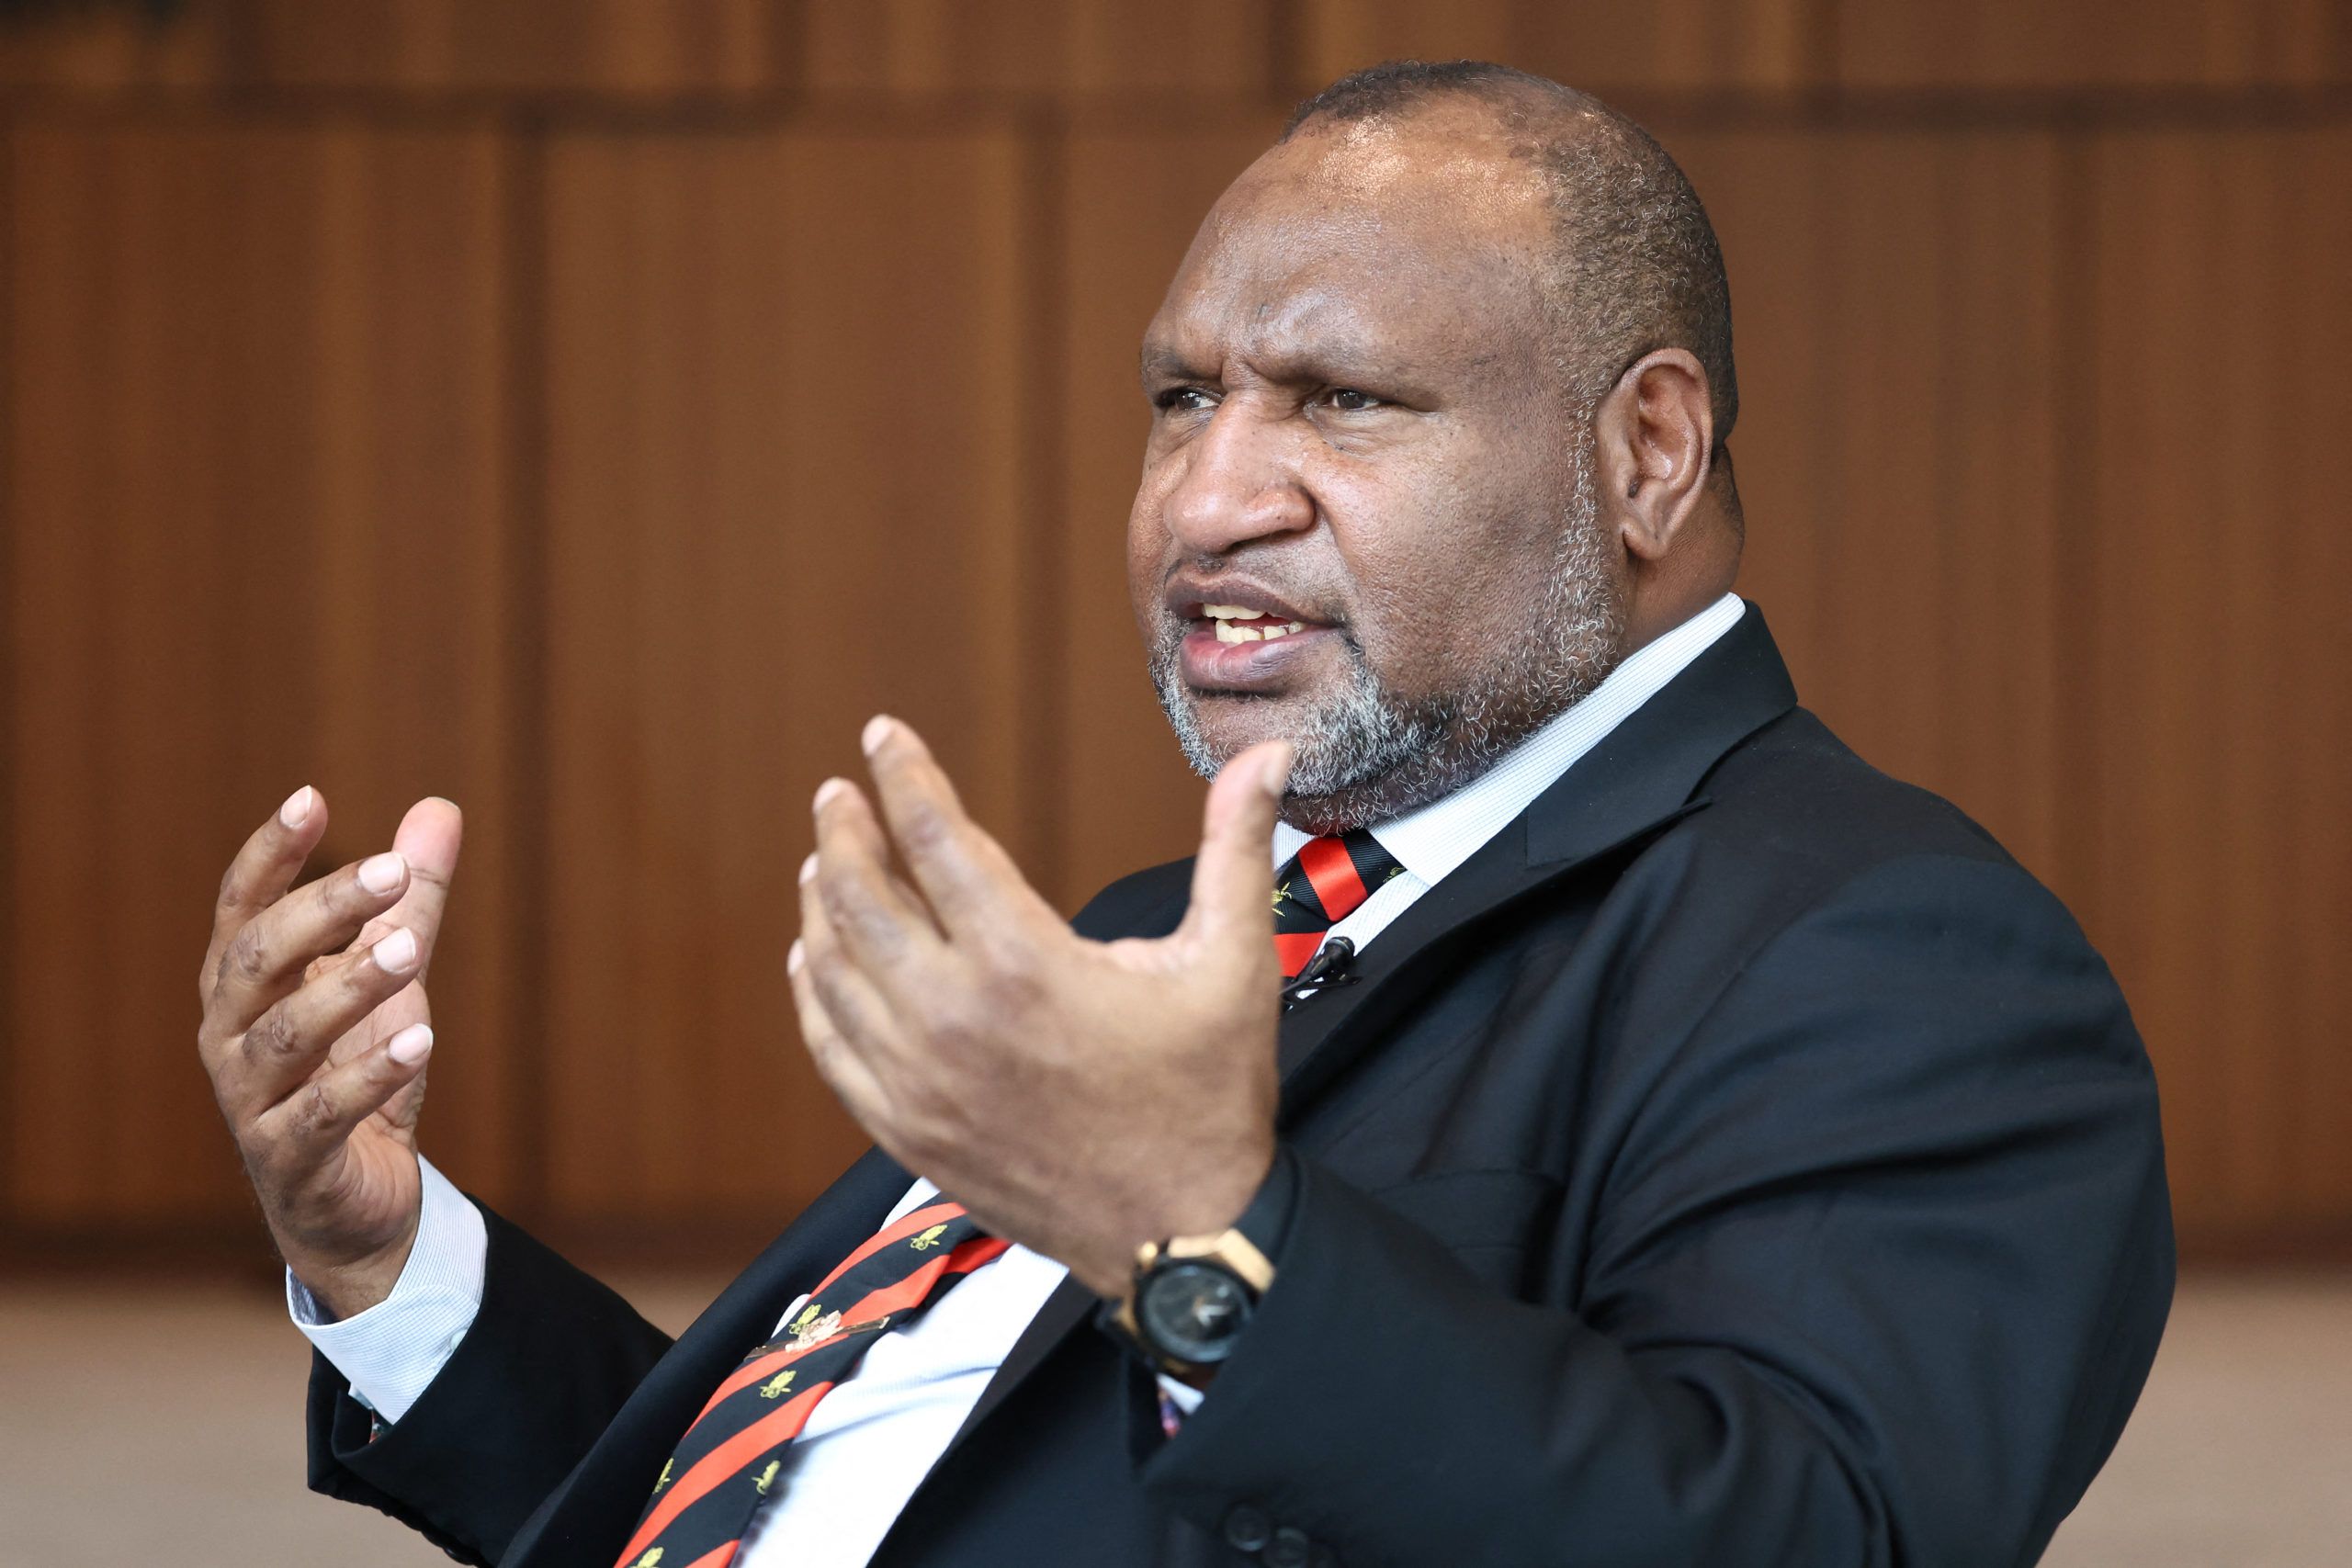 Papua New Guinea's Prime Minister James Marape reacts as he speaks during an interview in Sydney on December 11, 2023. (Photo by DAVID GRAY / AFP) (Photo by DAVID GRAY/AFP via Getty Images)